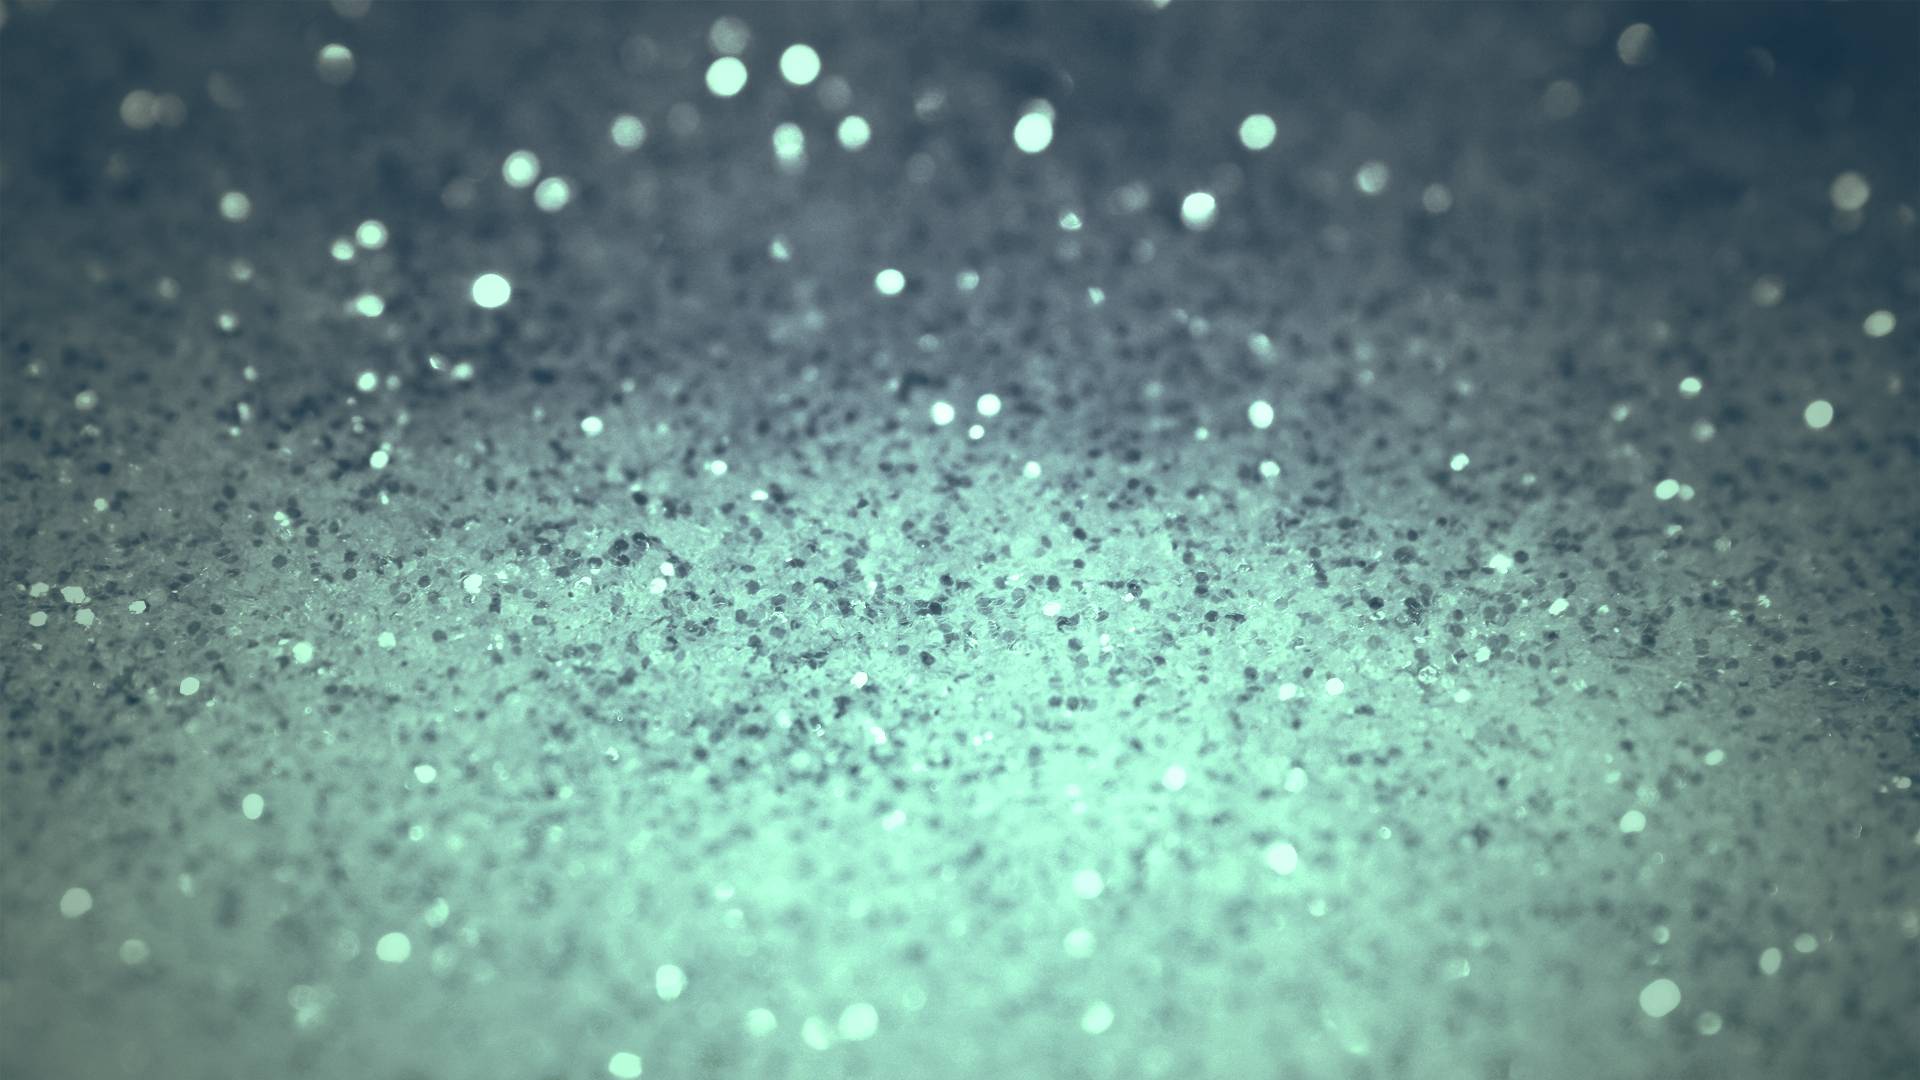 Wallpaper for Gt Teal Glitter Background 1920x1080PX Pink